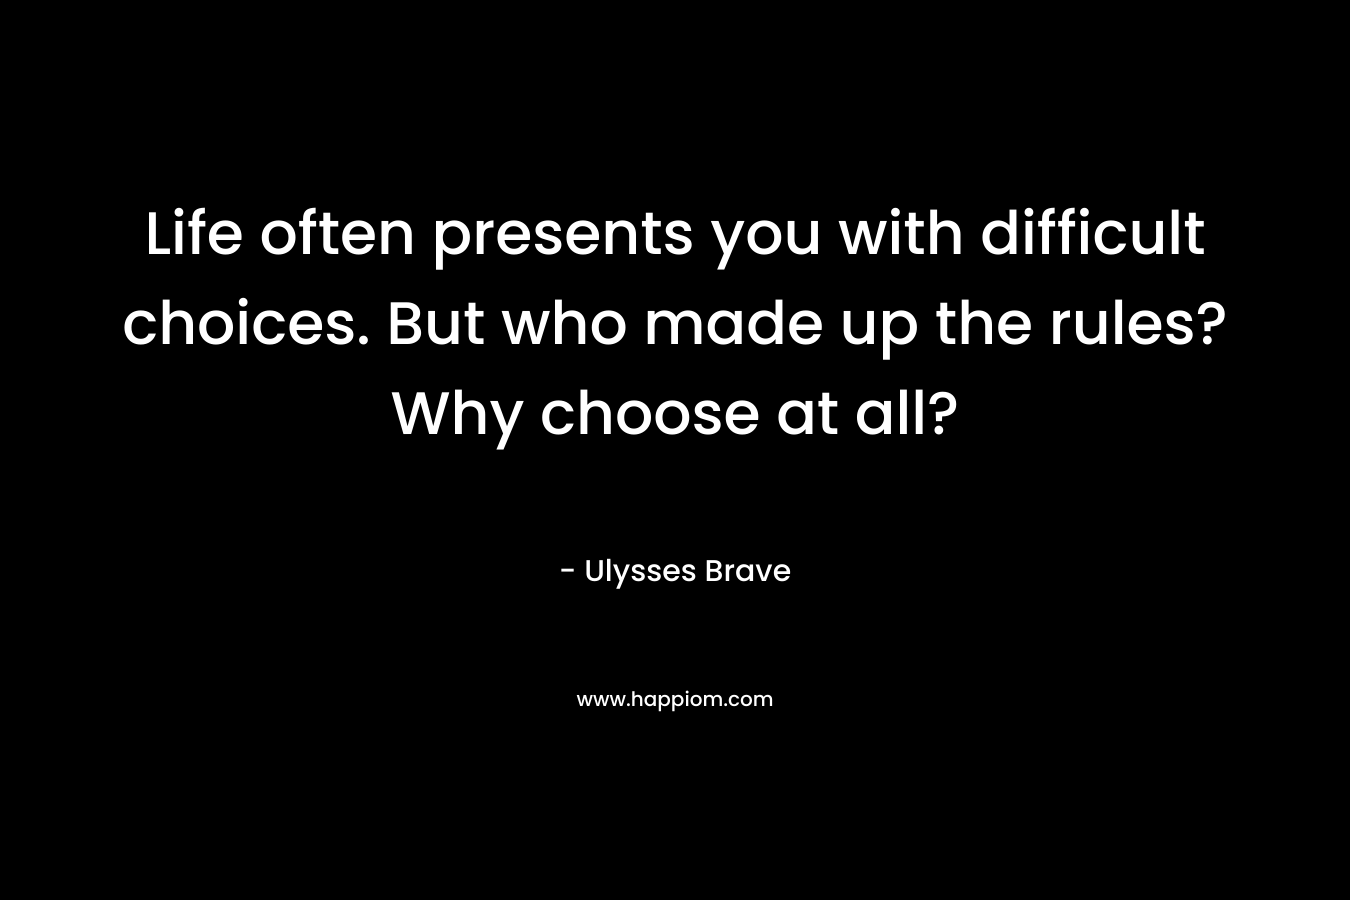 Life often presents you with difficult choices. But who made up the rules? Why choose at all?